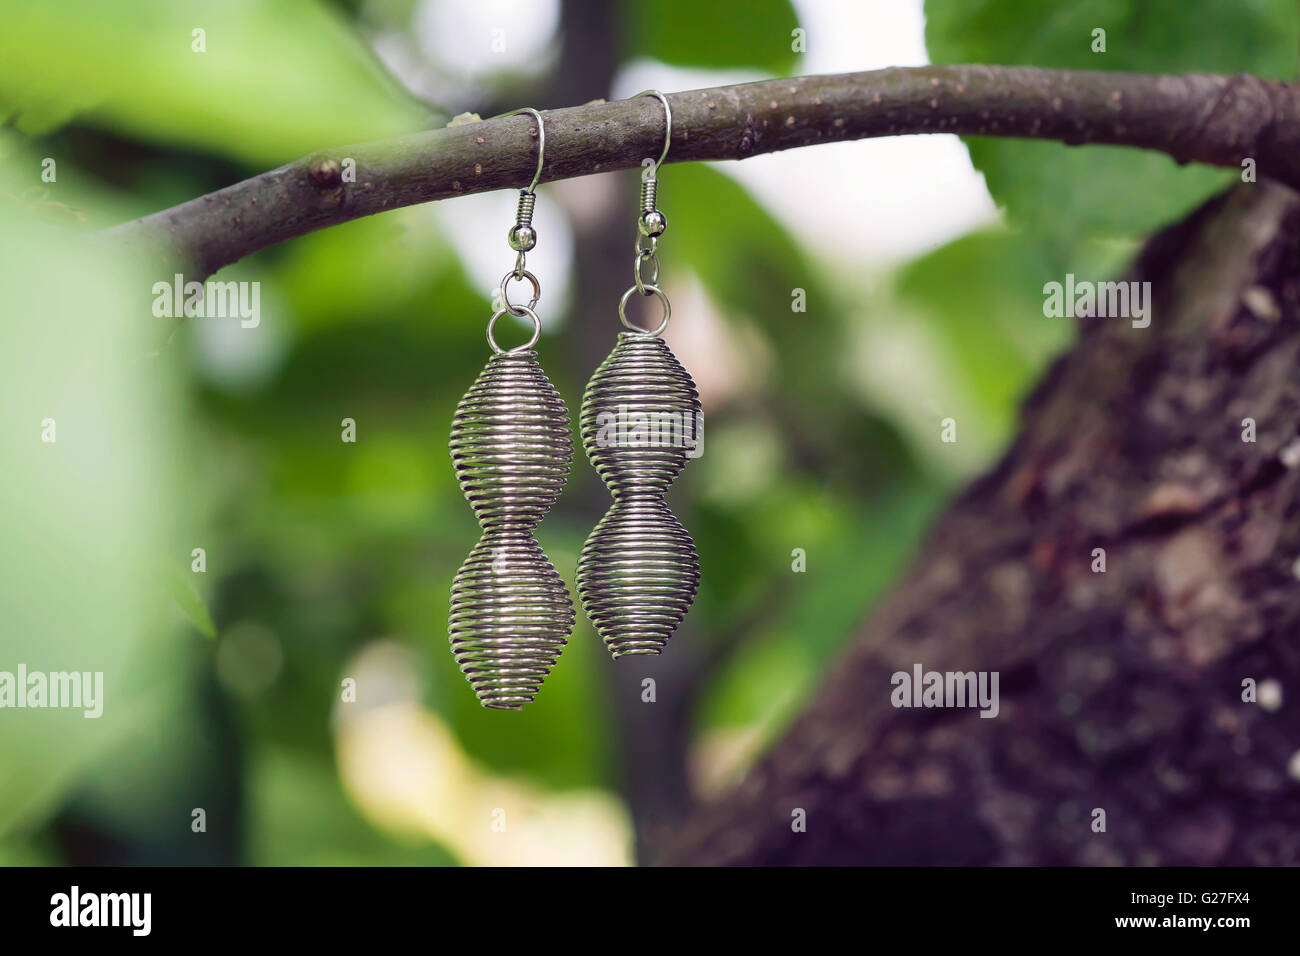 Spiral metal earring hanging on the branch Stock Photo